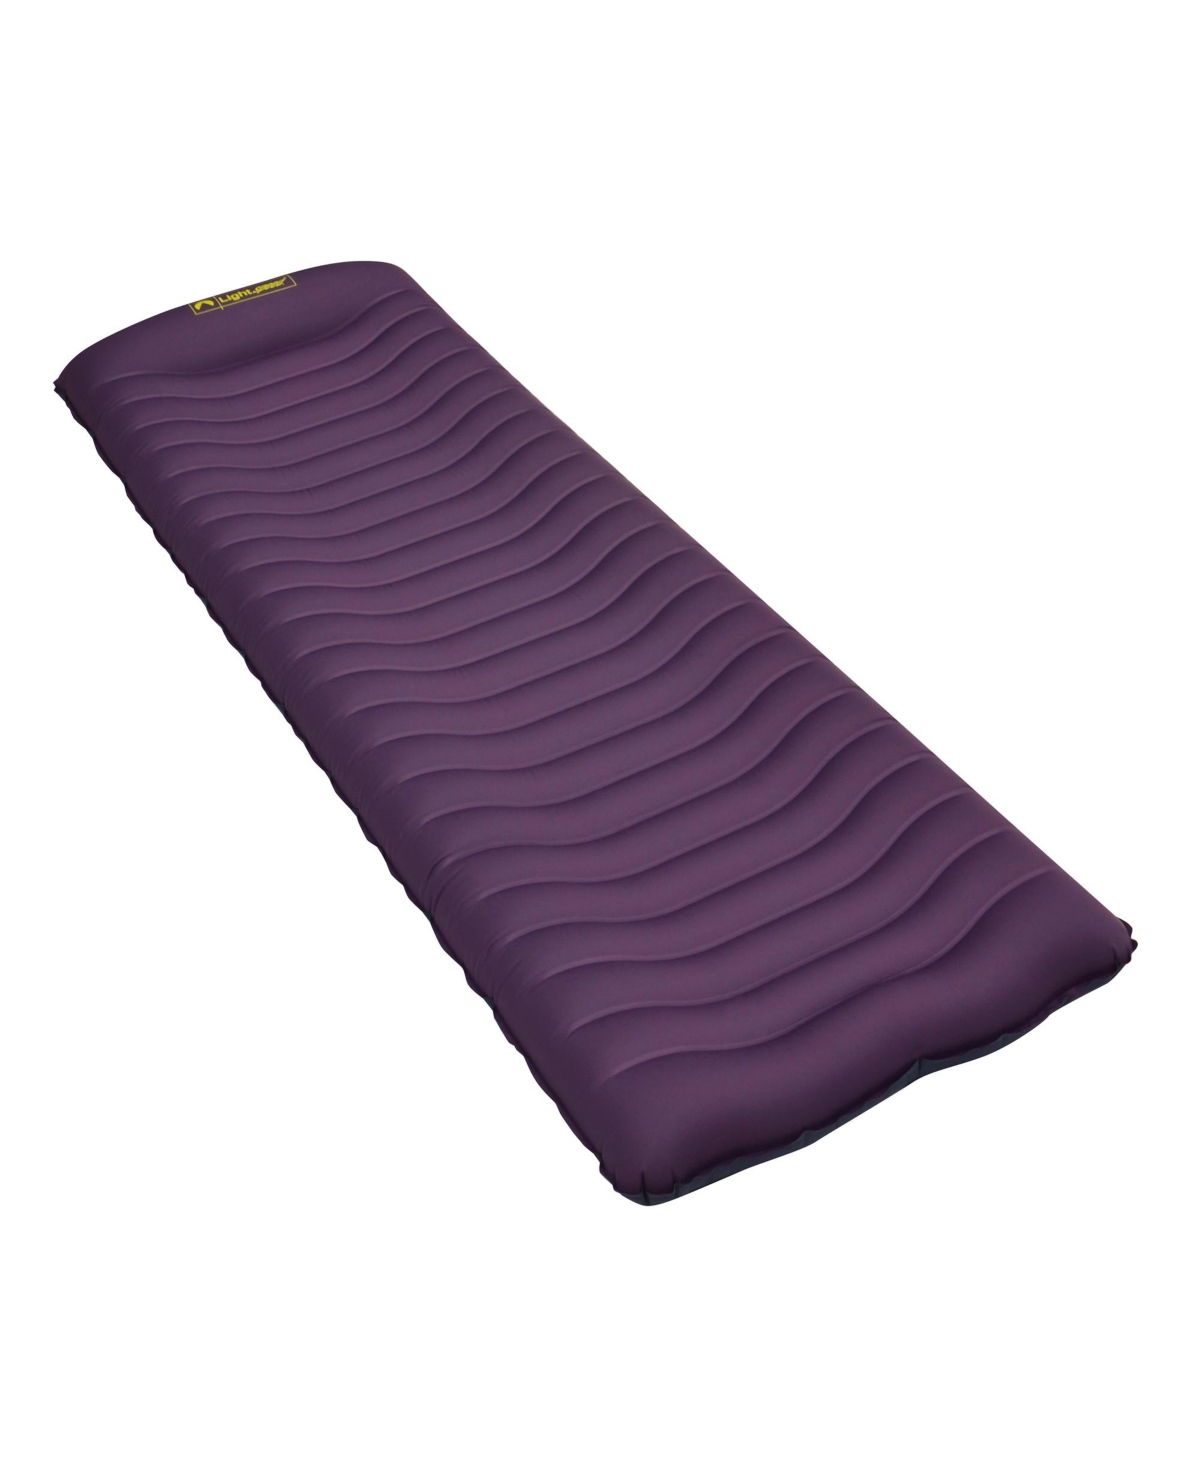 Lightspeed Outdoors The Cradle Curved Air Mat, Chive - Eggplant/deep space